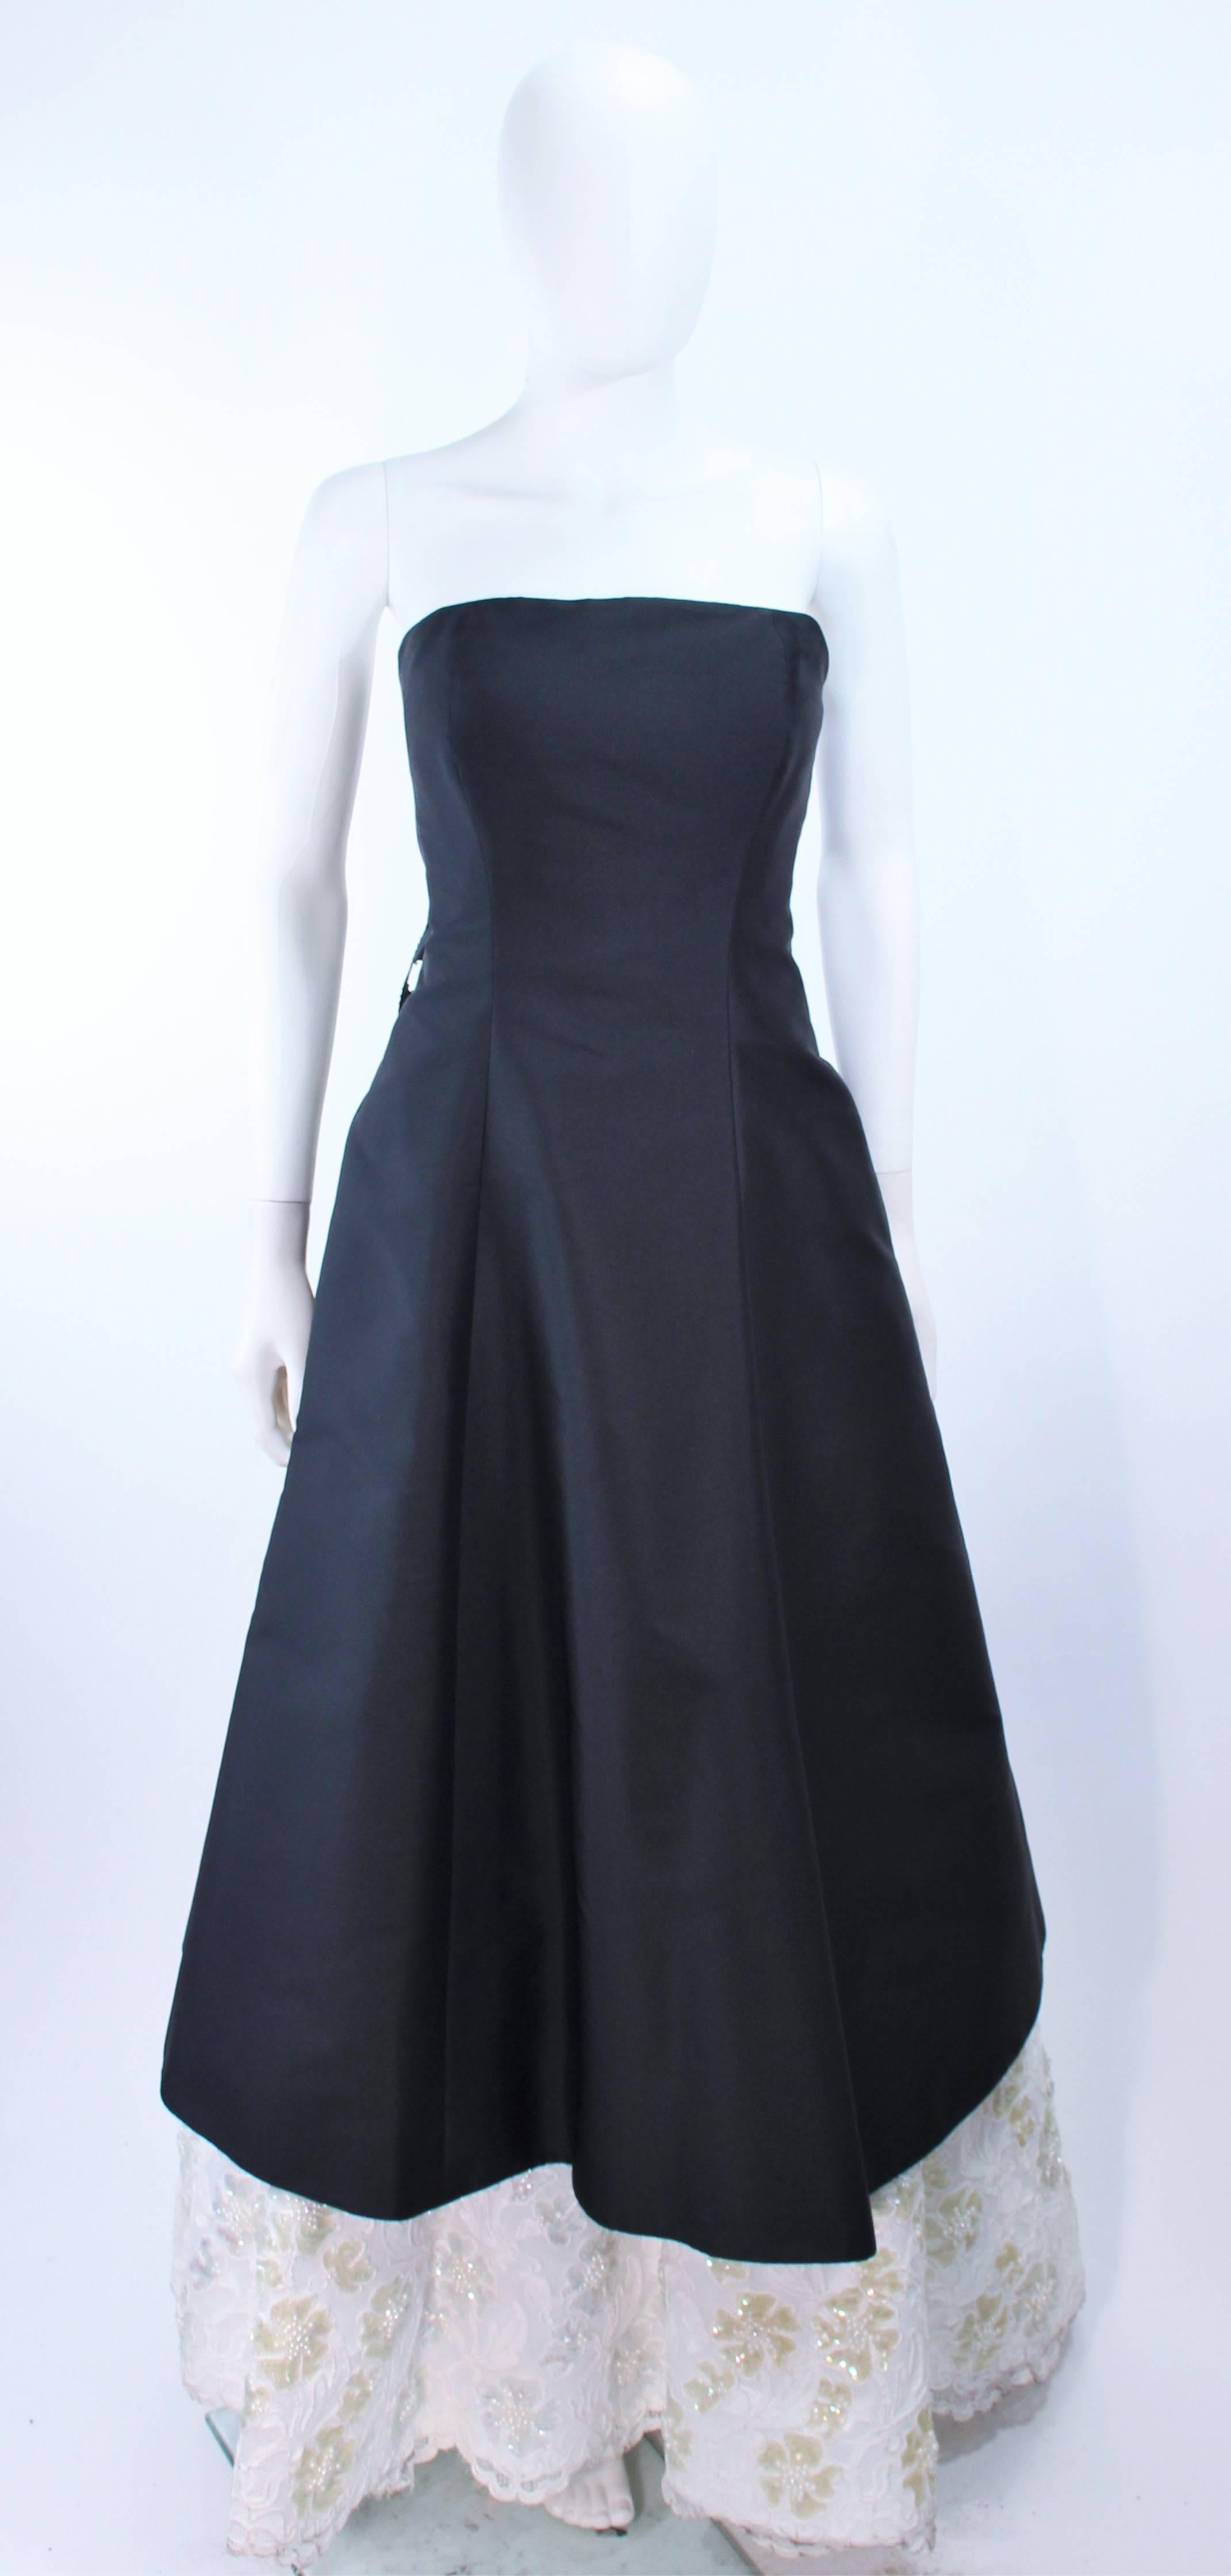 This Sam Carlin gown is composed of a black silk with a white sequin lace accenting. Features a center back bow with cascading. There is a center back zipper closure. In excellent vintage condition.

**Please cross-reference measurements for